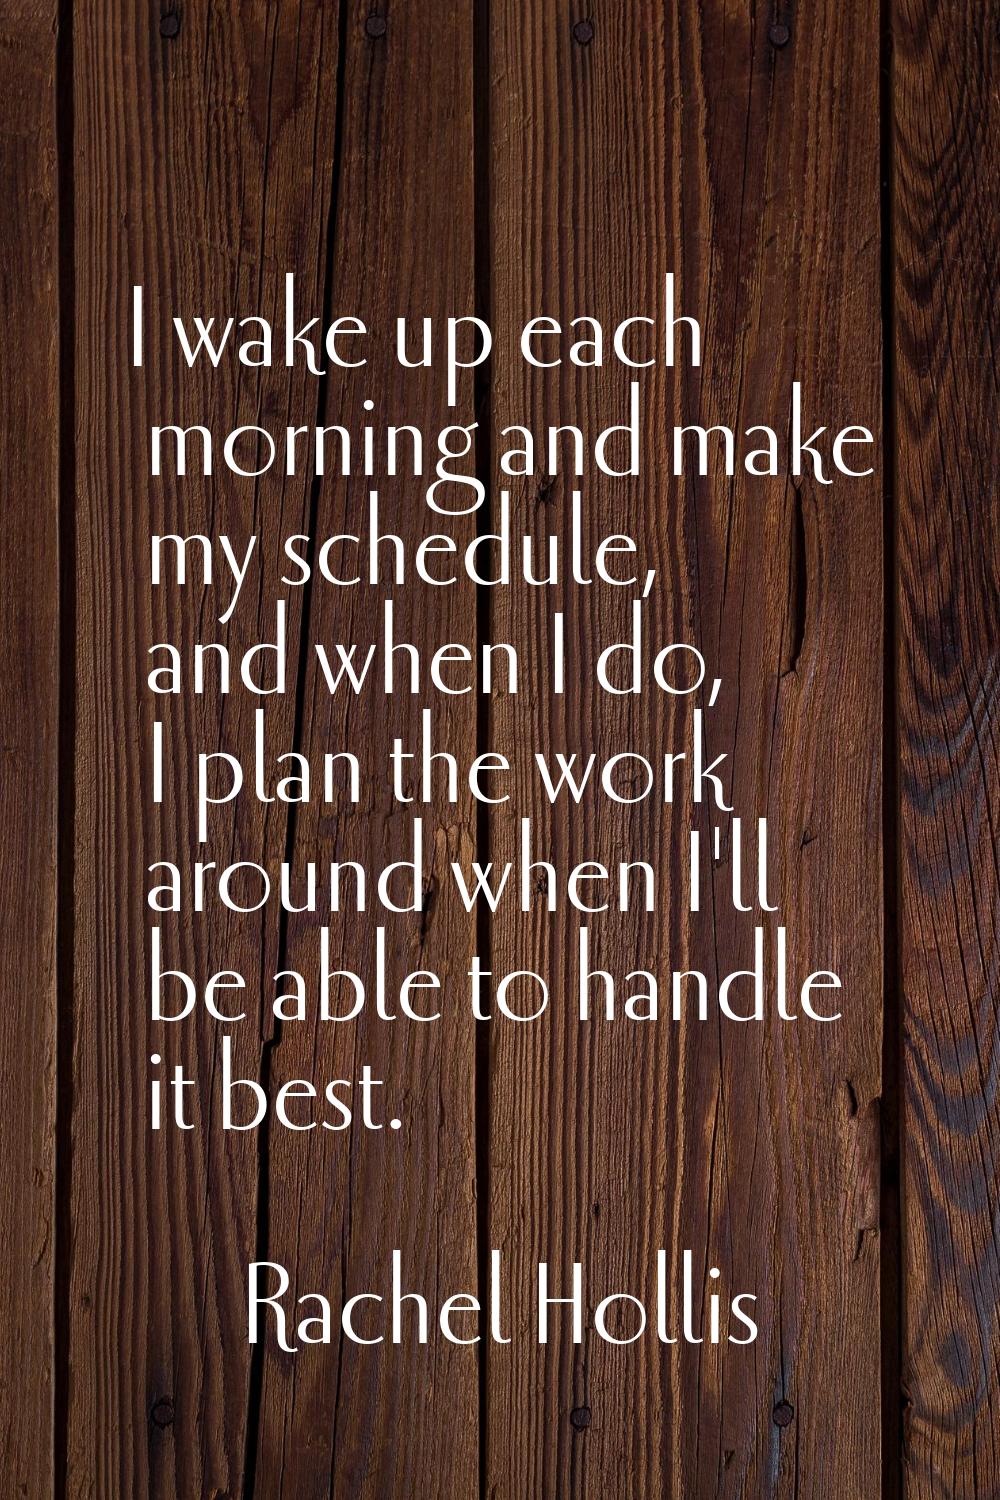 I wake up each morning and make my schedule, and when I do, I plan the work around when I'll be abl